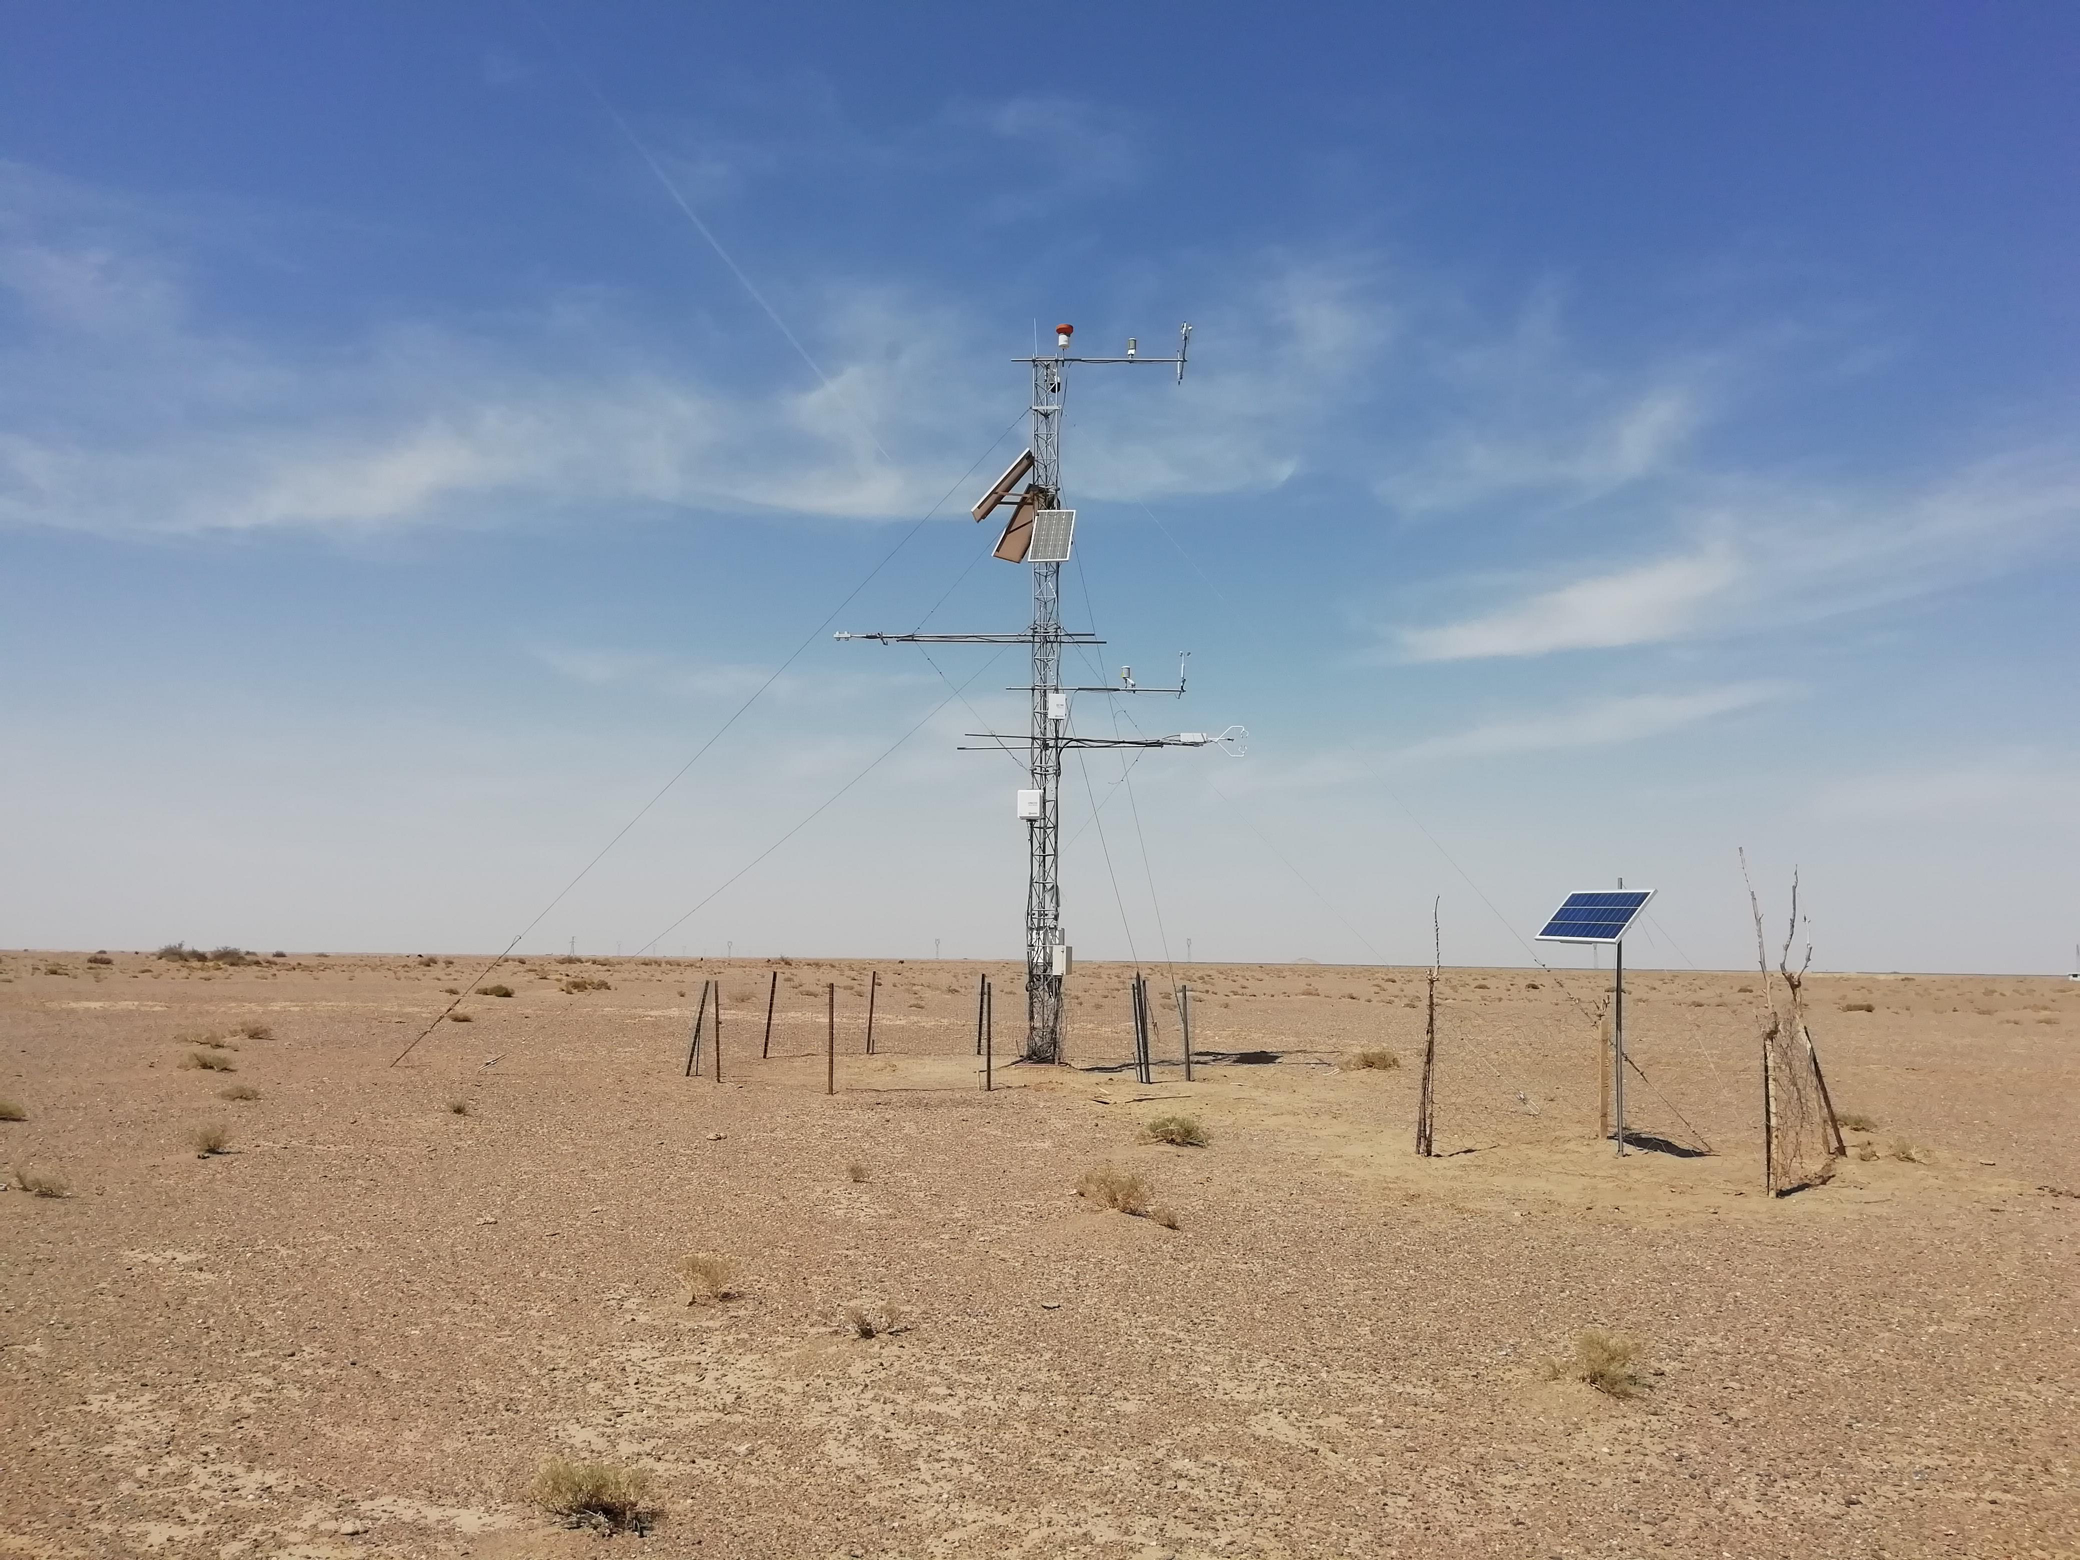 Qilian Mountains integrated observatory network: Dataset of Heihe integrated observatory network (automatic weather station of desert station, 2020)